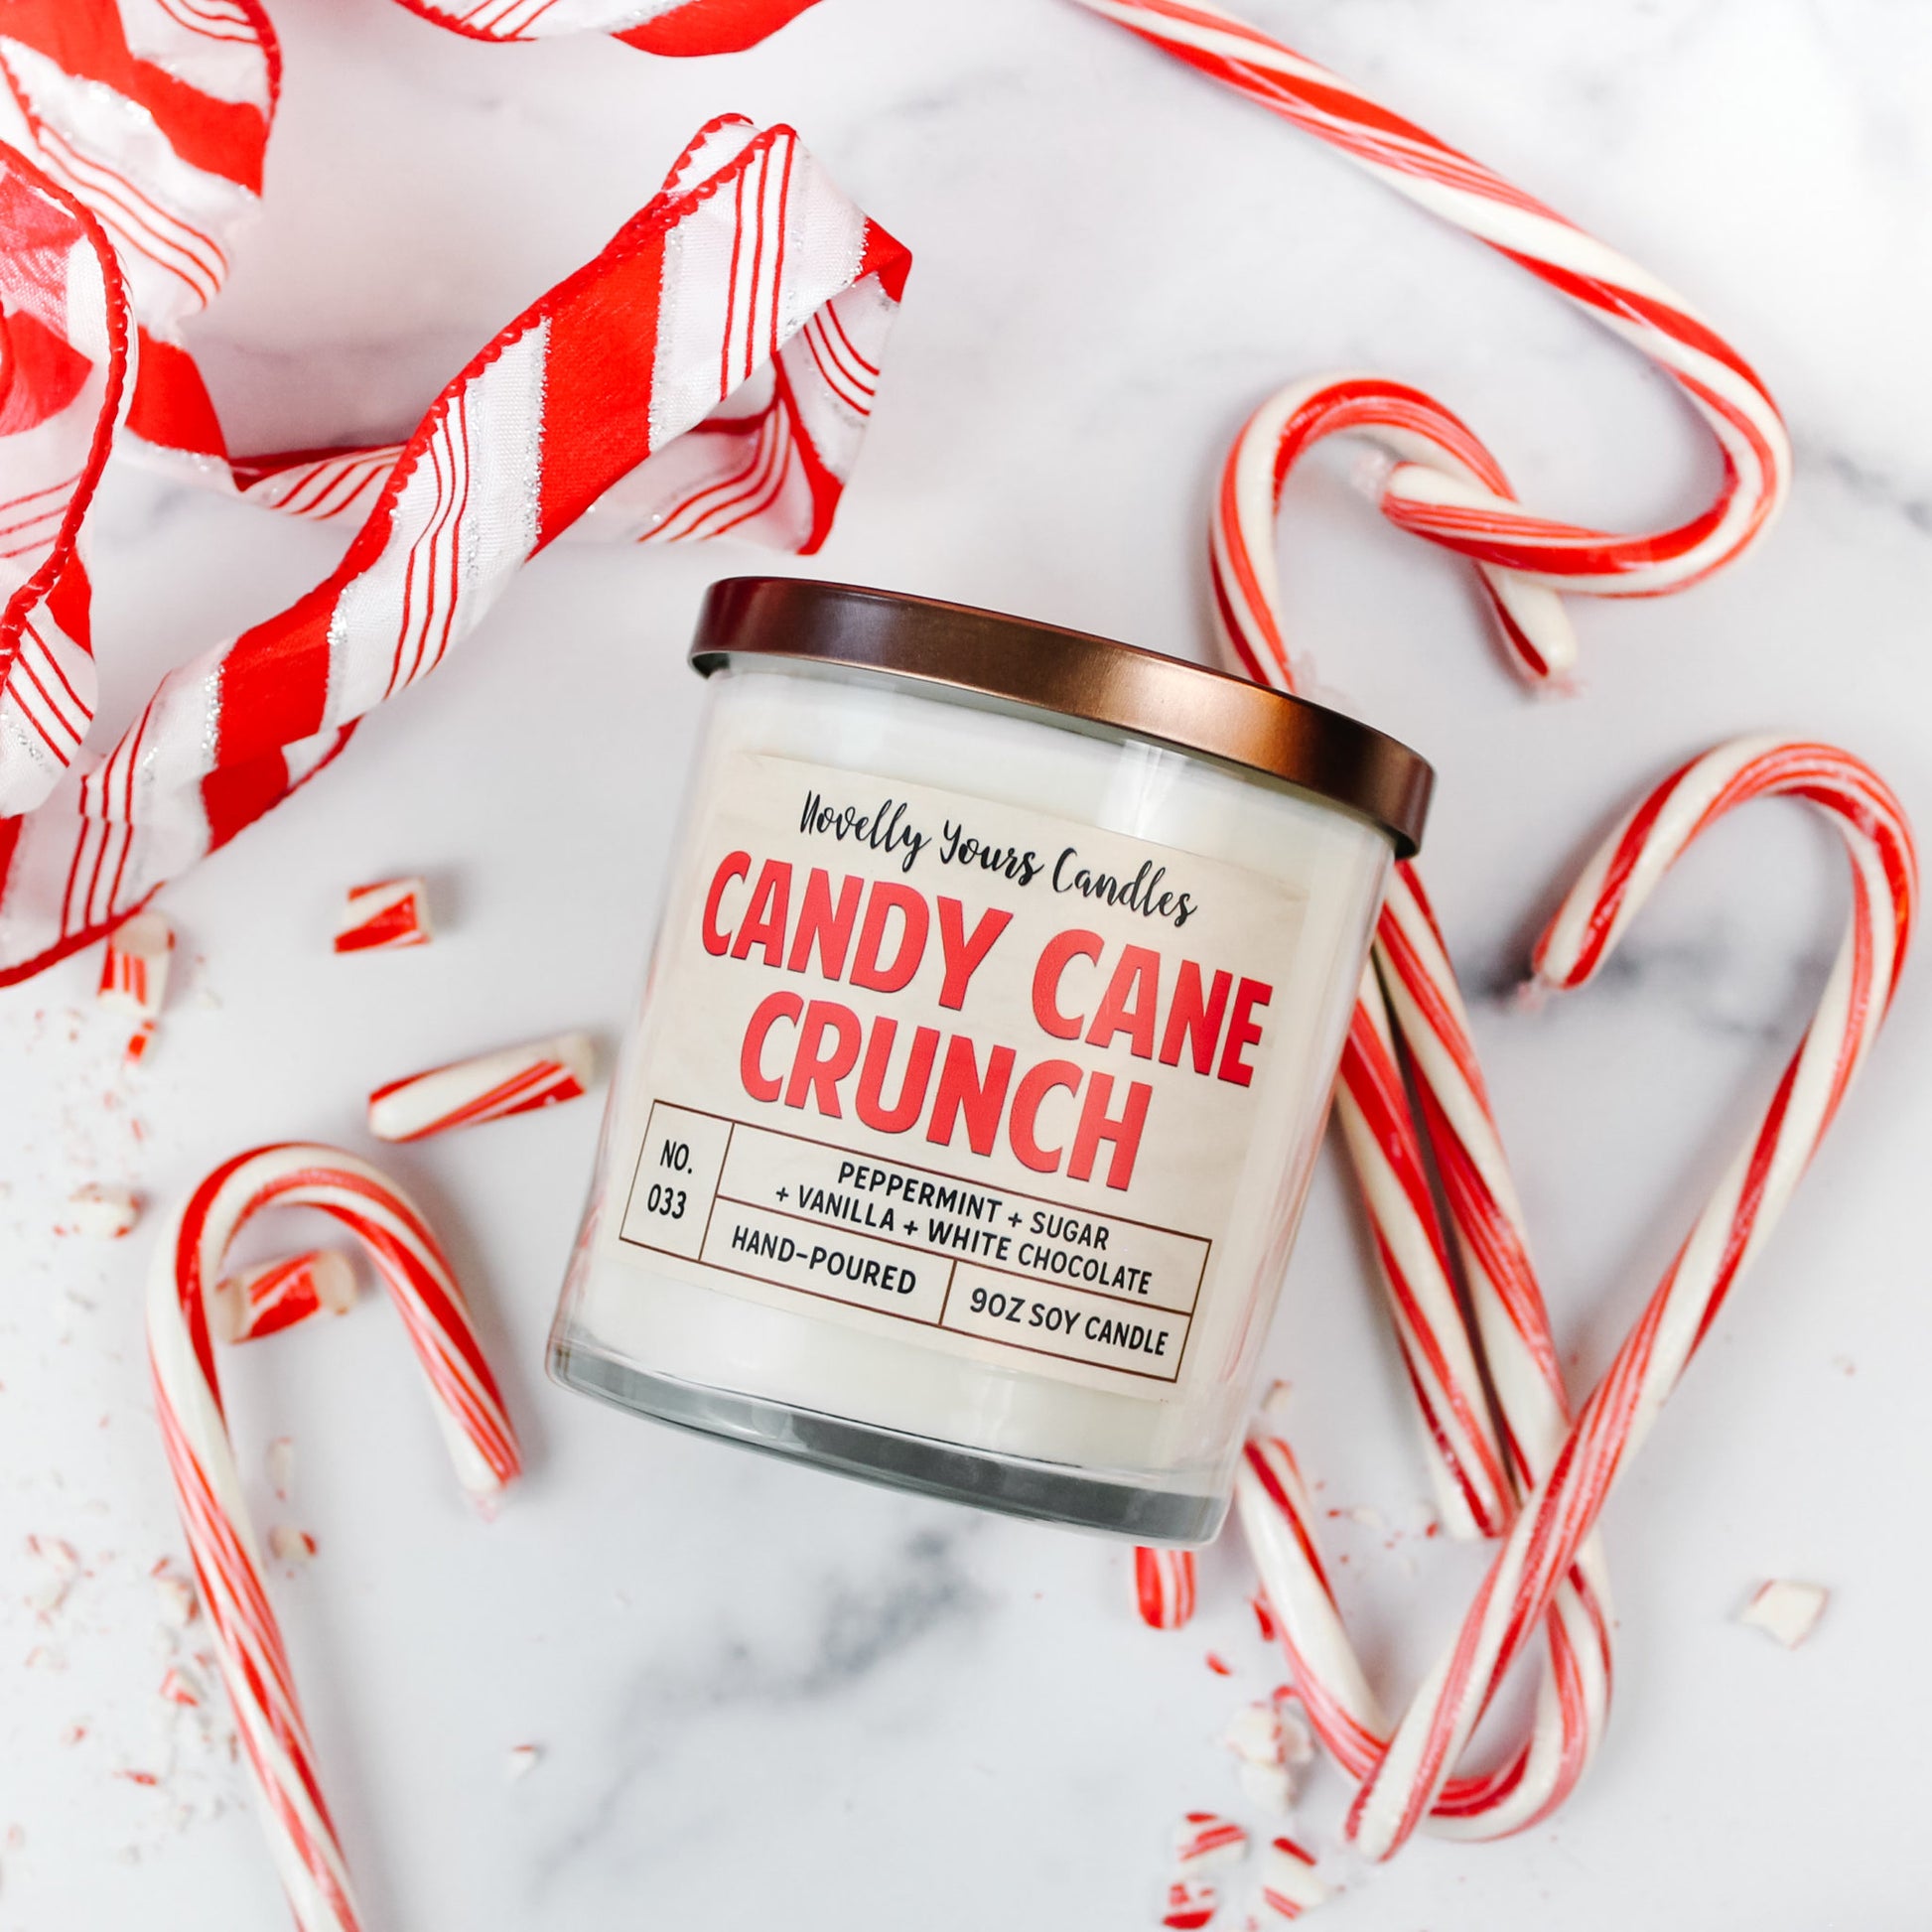 candy cane scented candle in clear glass tumbler jar with bronze lid, surrounded by candy canes